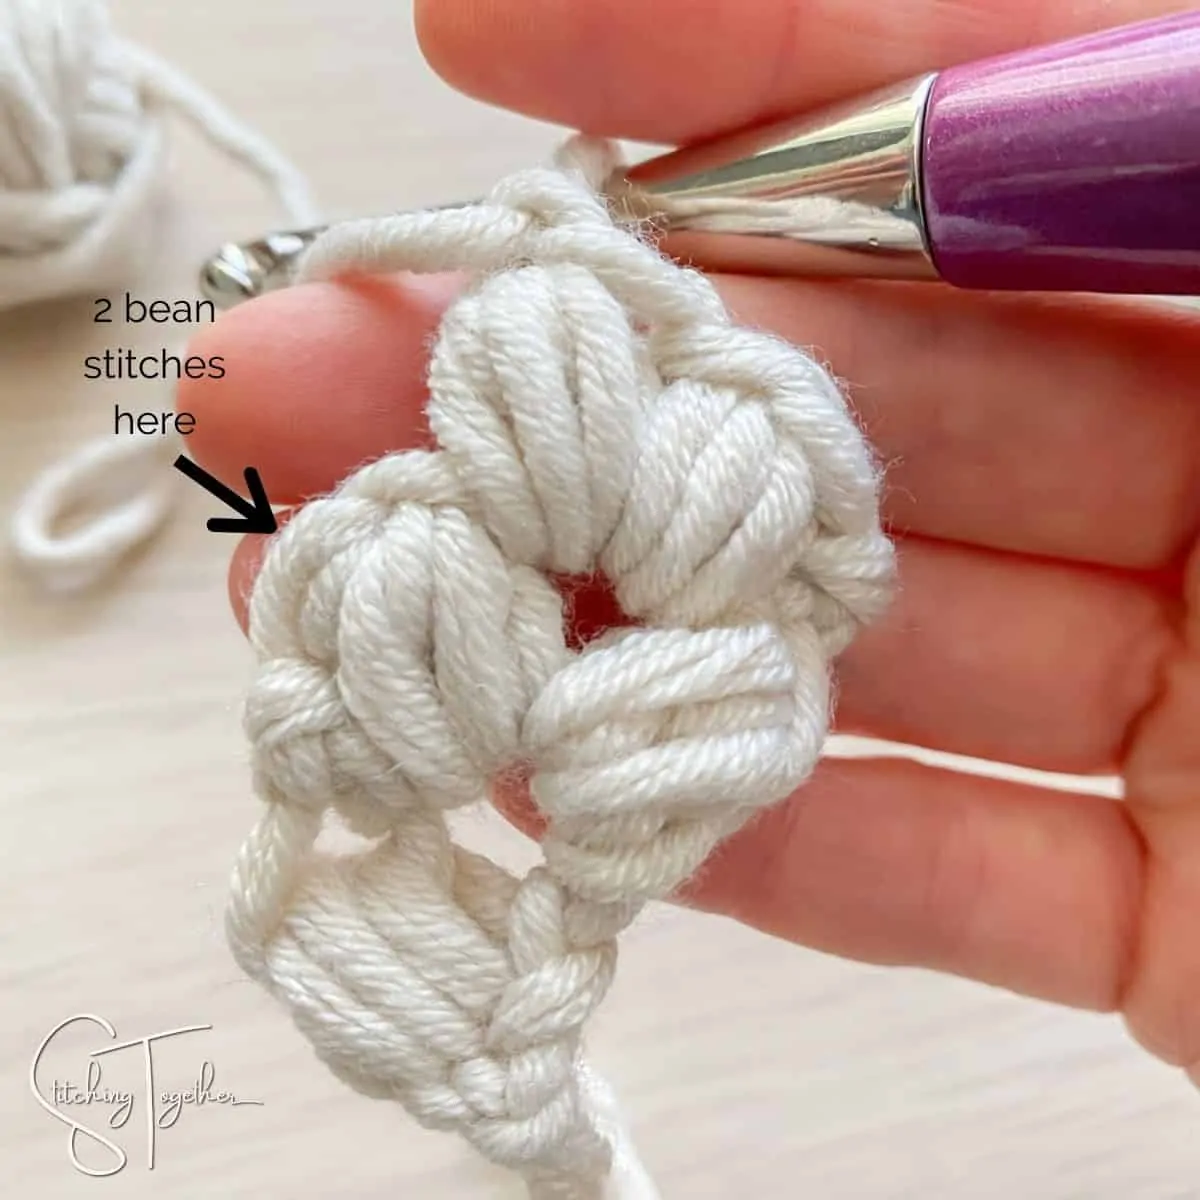 arrow showing where to place the stitches (yarn, hook and hand)